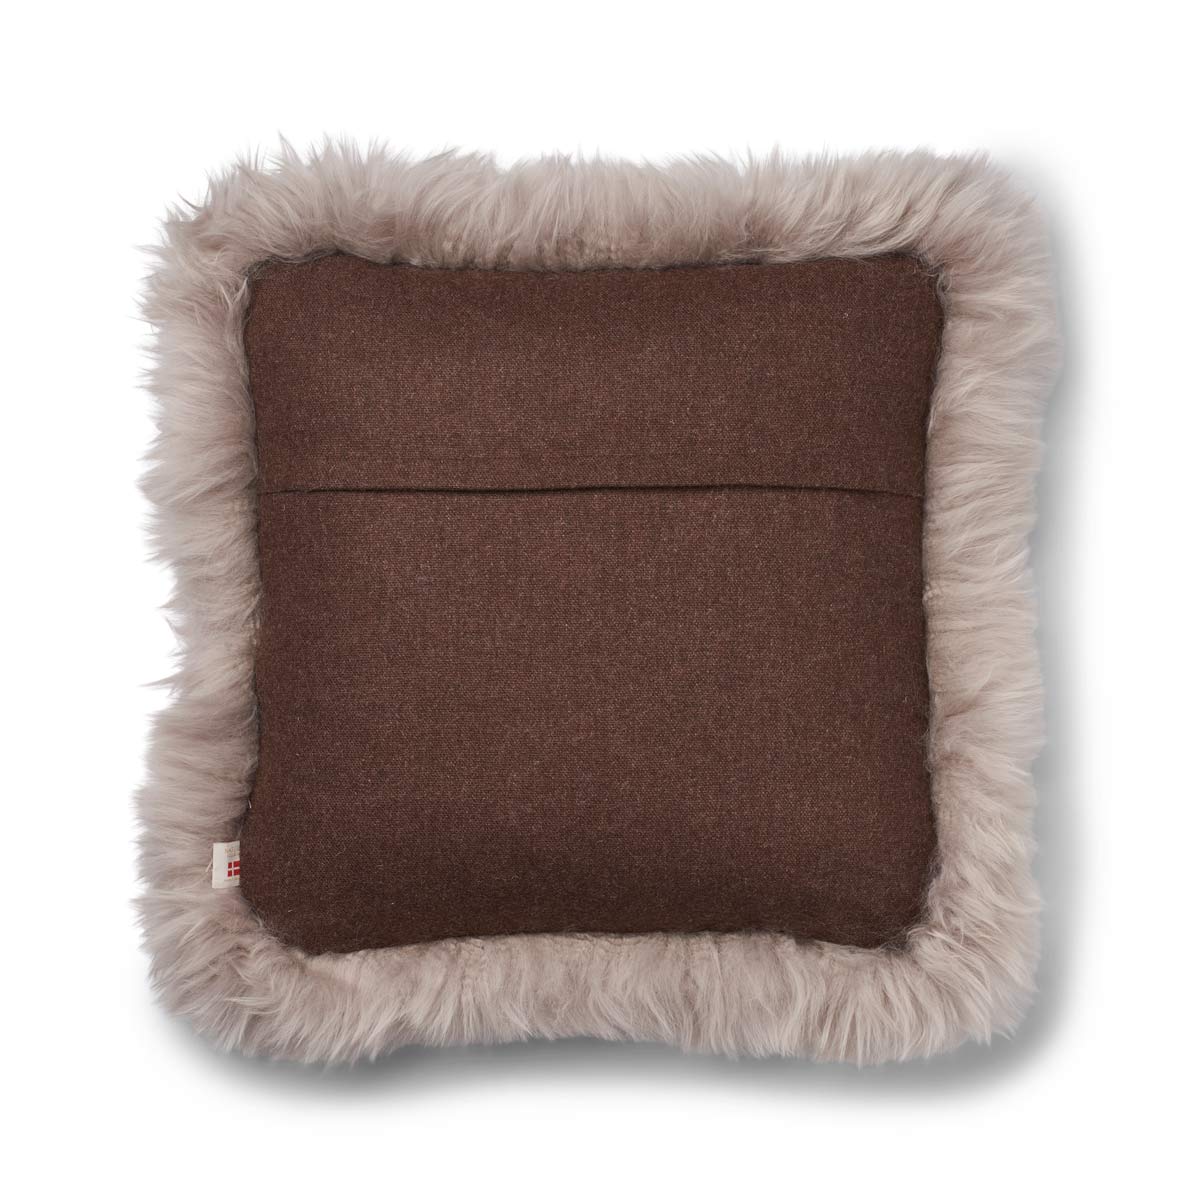 Classic Collection, Doublesided 100 % Wool Cushion and LW New Zealand Sheepskin Trimming Size: 52x52 cm